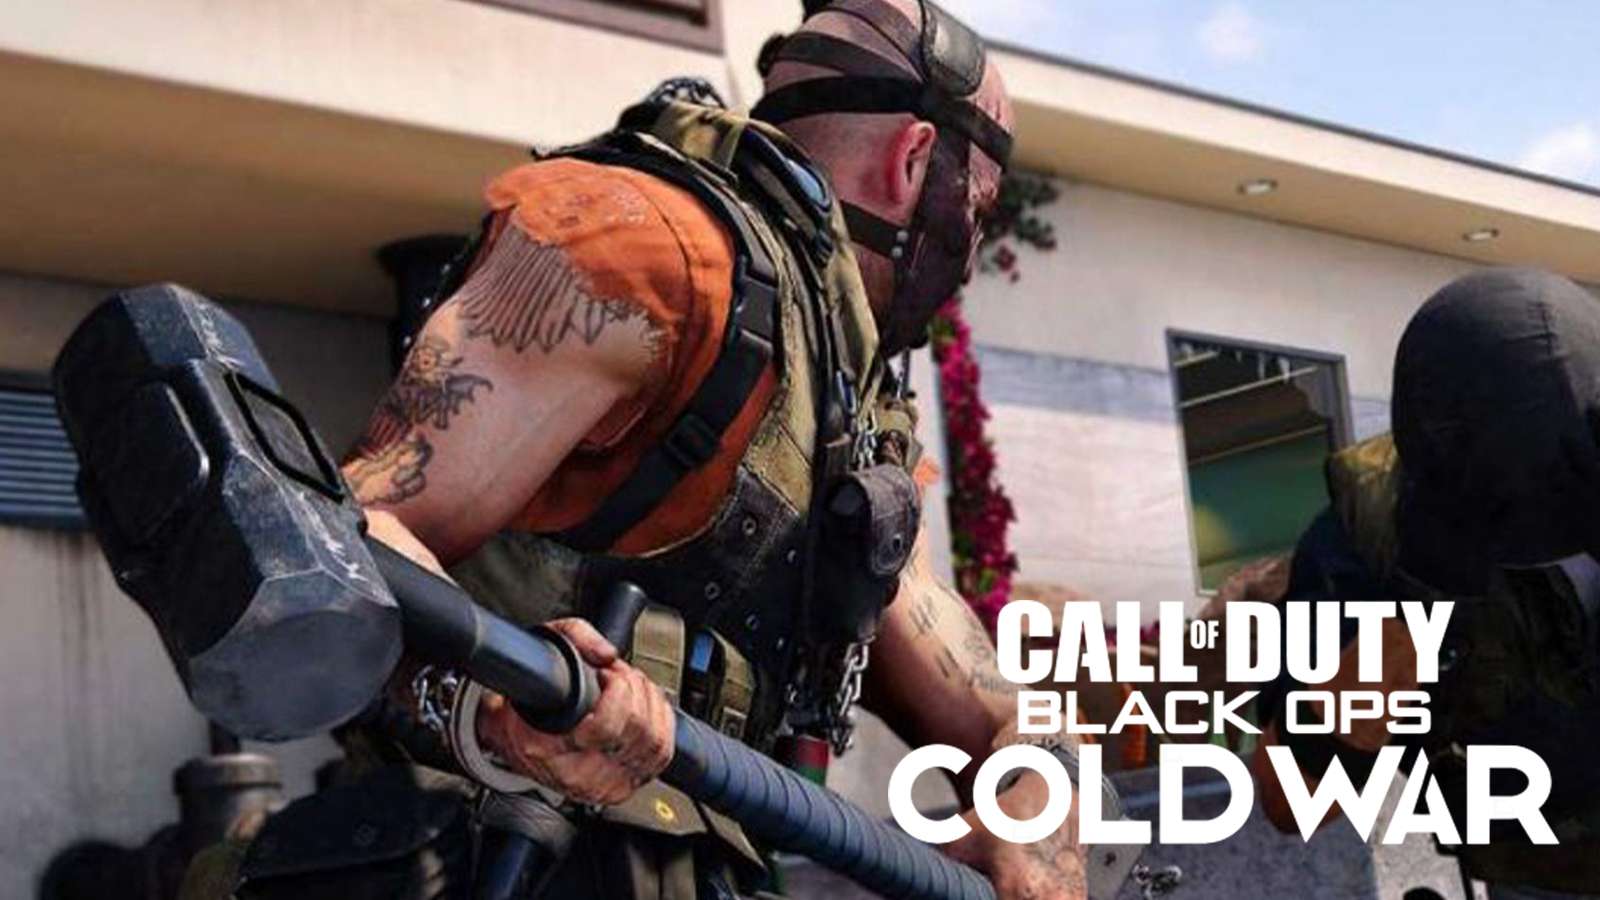 Sledgehammer in Call of Duty Black Ops Cold War